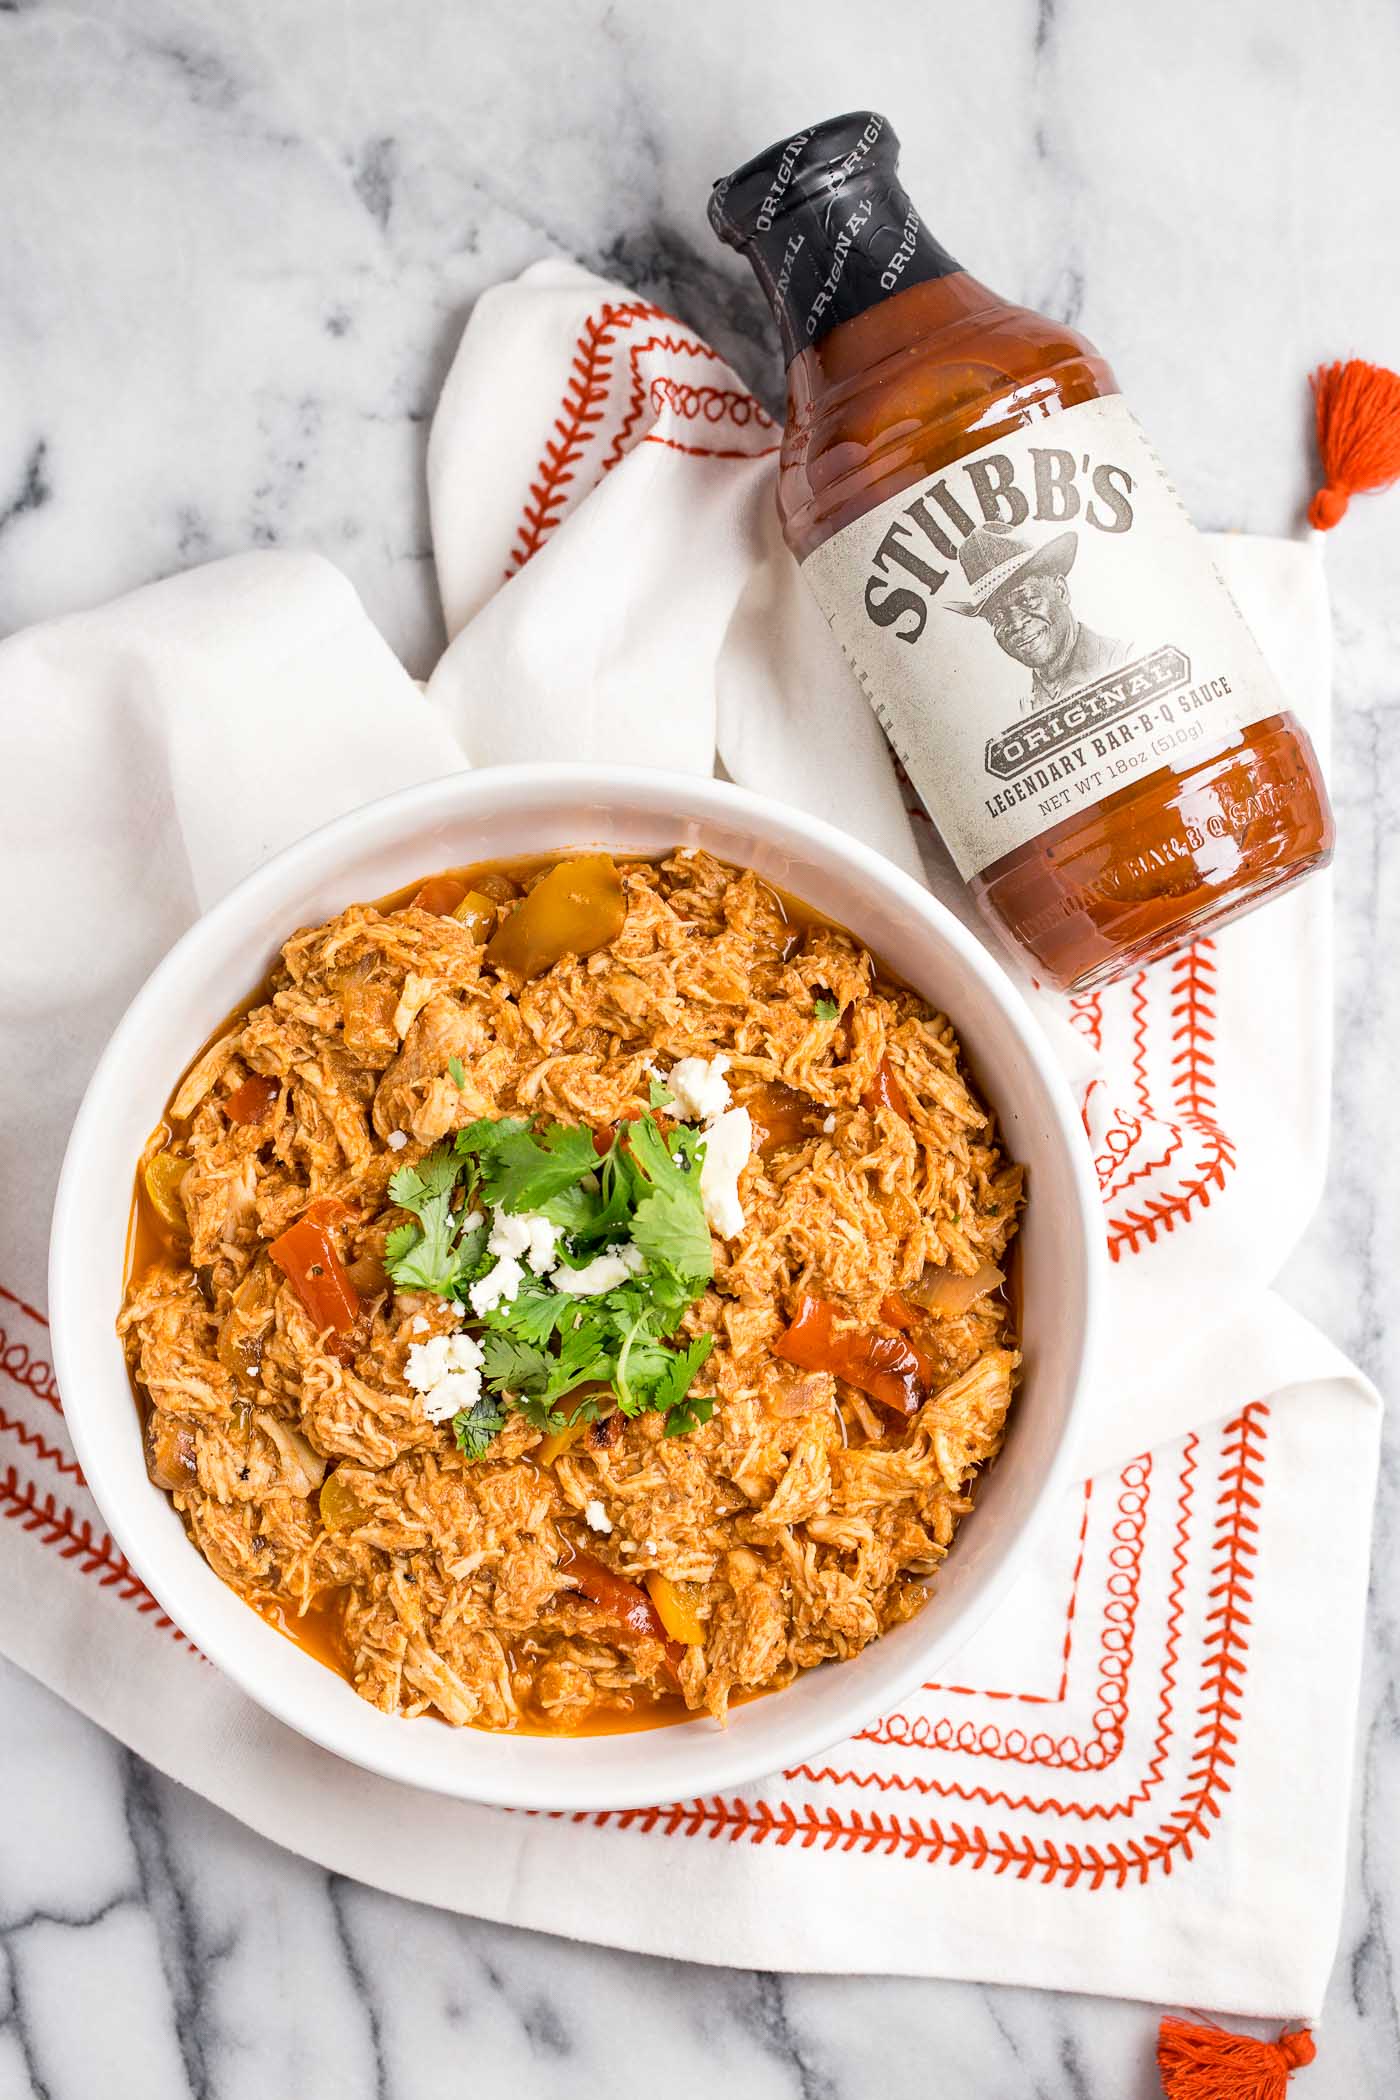 not only is slow cooker shredded bbq chicken an easy & healthy weeknight dinner, it’s SUPER versatile. here are 3 of my favorite ways to use it (without eating the same thing all week long!) - shredded bbq chicken stuffed sweet potatoes, shredded bbq chicken meal prep bowls, & shredded bbq chicken sliders perfect for game day! #playswellwithbutter #slowcookerrecipe #crockpotrecipe #healthydinnerrecipe #easydinnerrecipe #bbqchicken #barbecuechicken